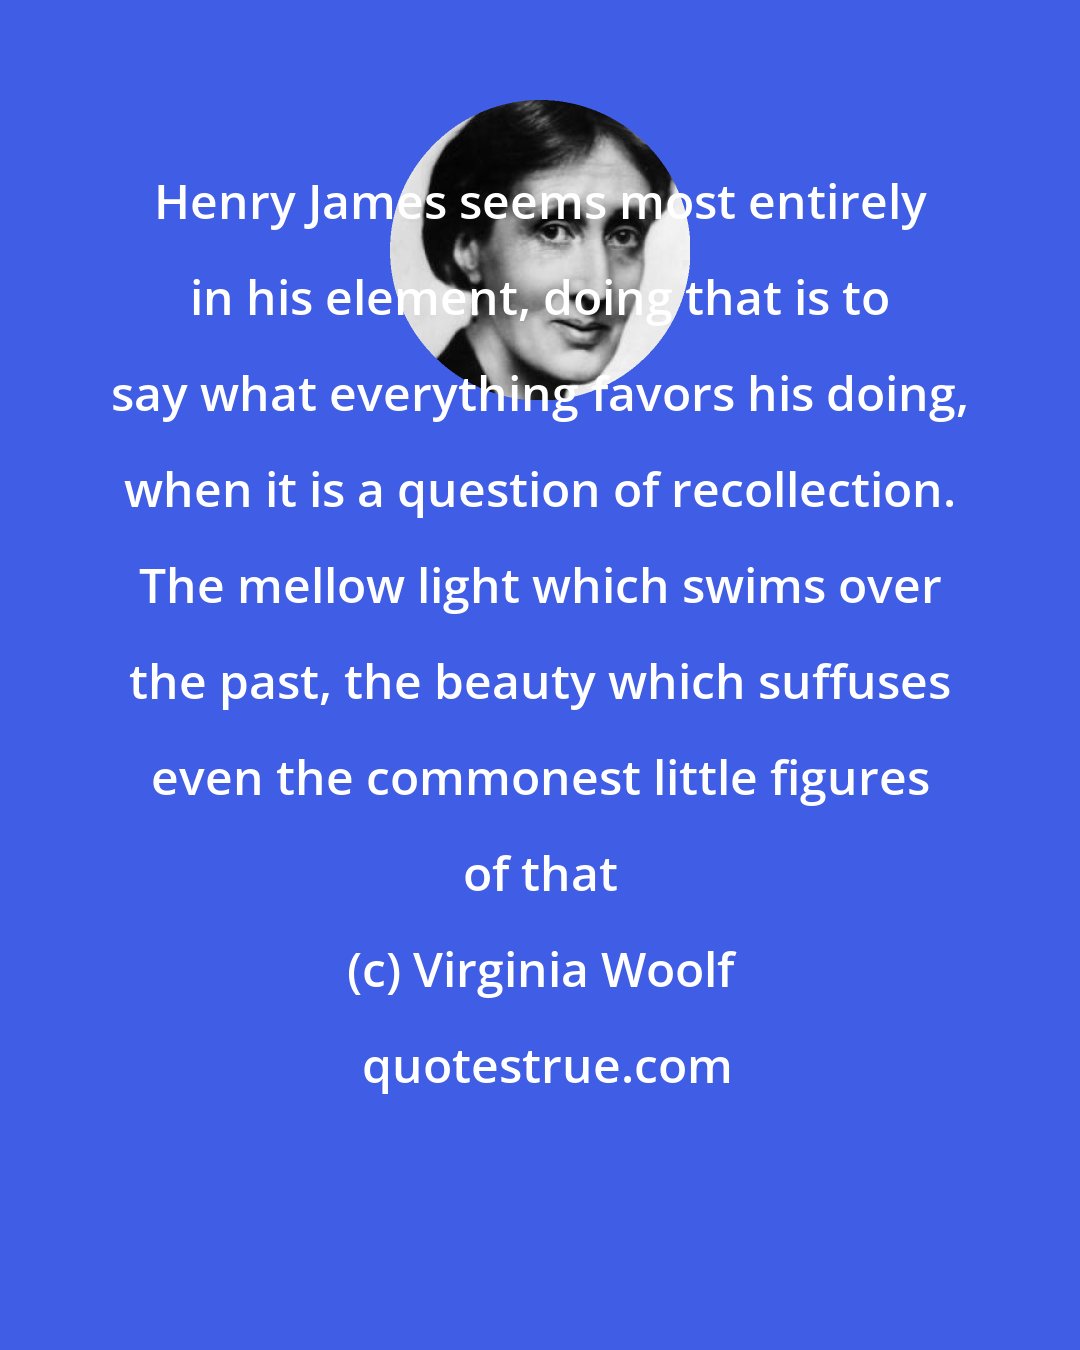 Virginia Woolf: Henry James seems most entirely in his element, doing that is to say what everything favors his doing, when it is a question of recollection. The mellow light which swims over the past, the beauty which suffuses even the commonest little figures of that